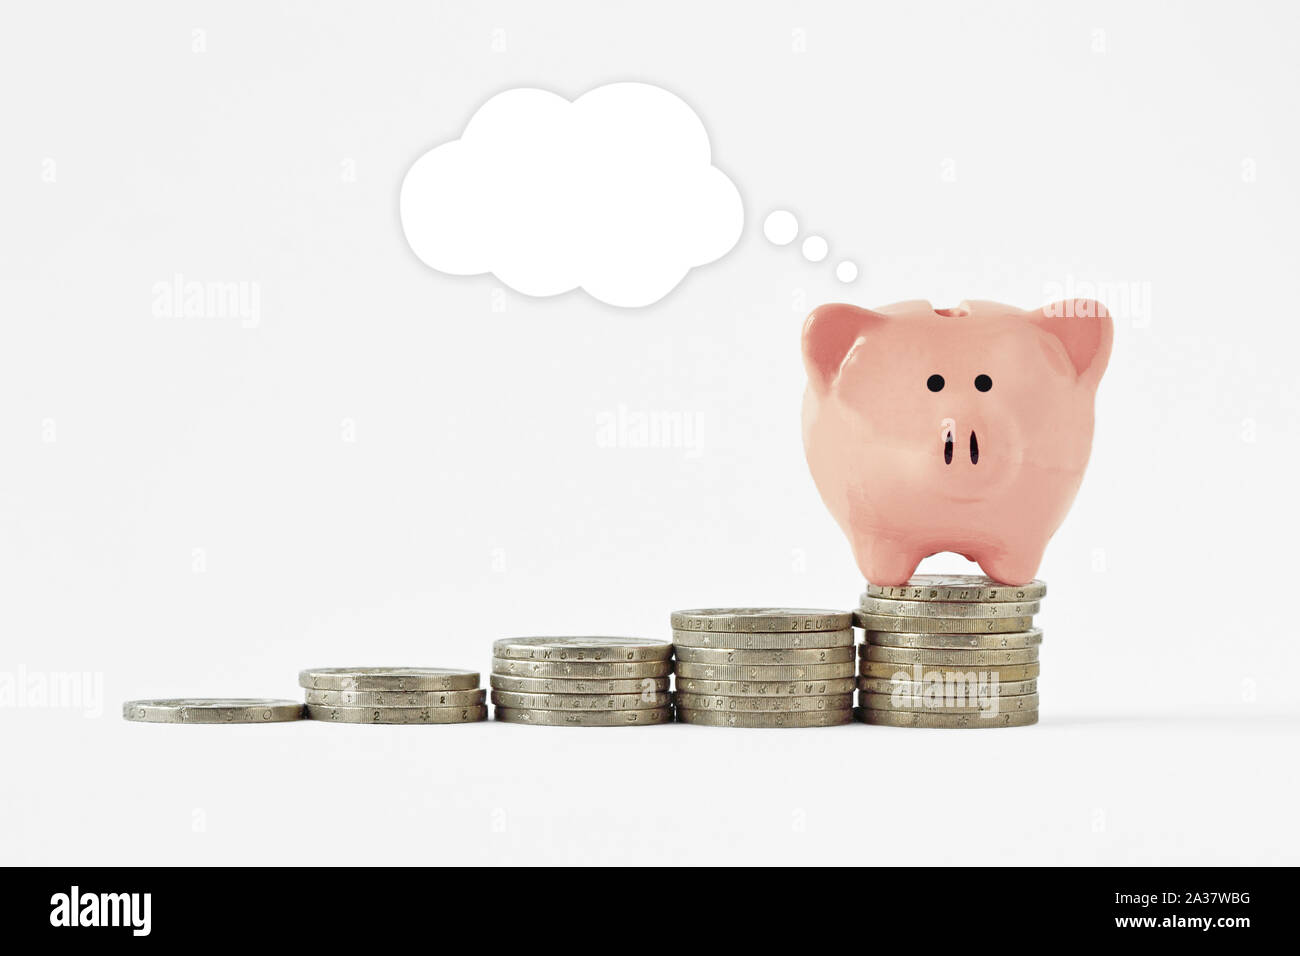 Piggy bank with blank comcic bubble on raising piles of coins - Concept of saving money Stock Photo